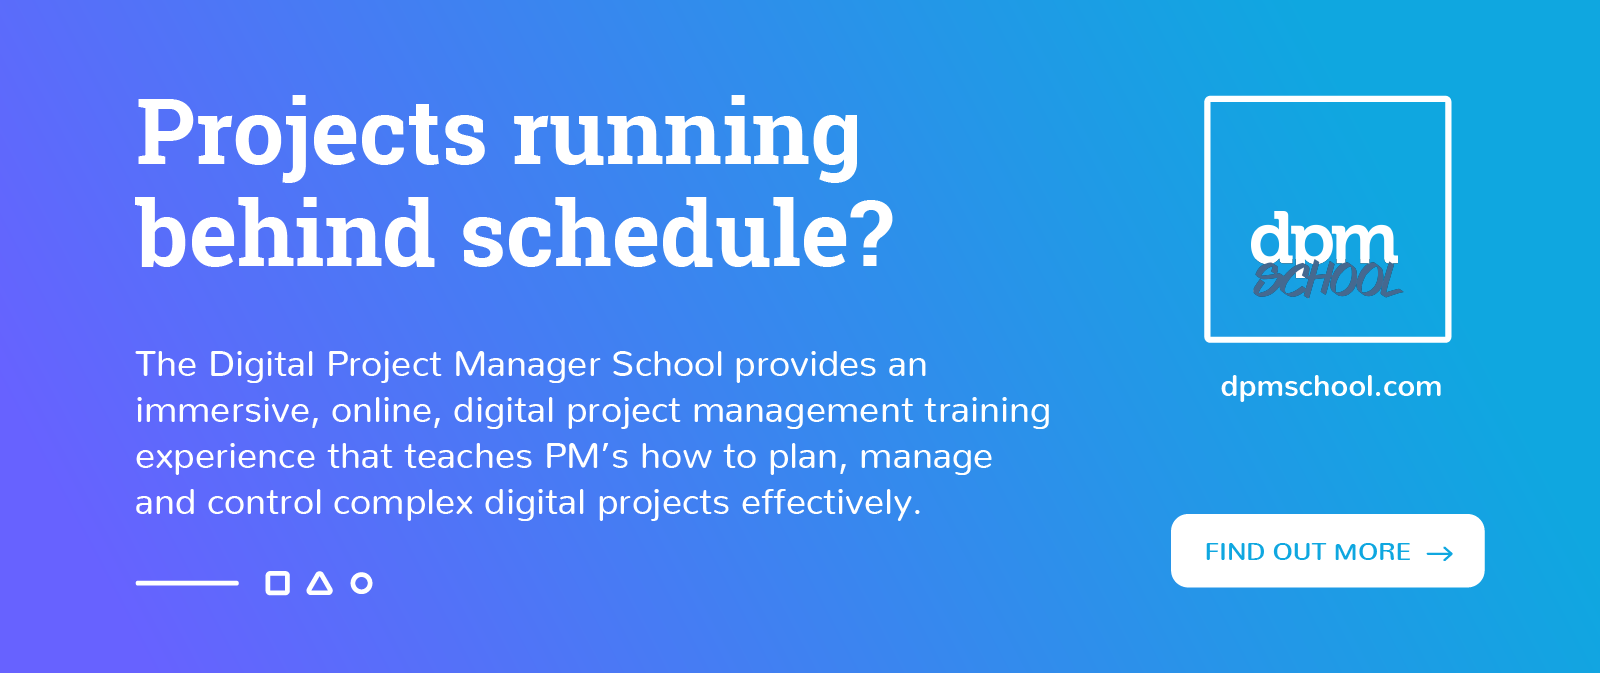 Check out the Digital Project Manager School